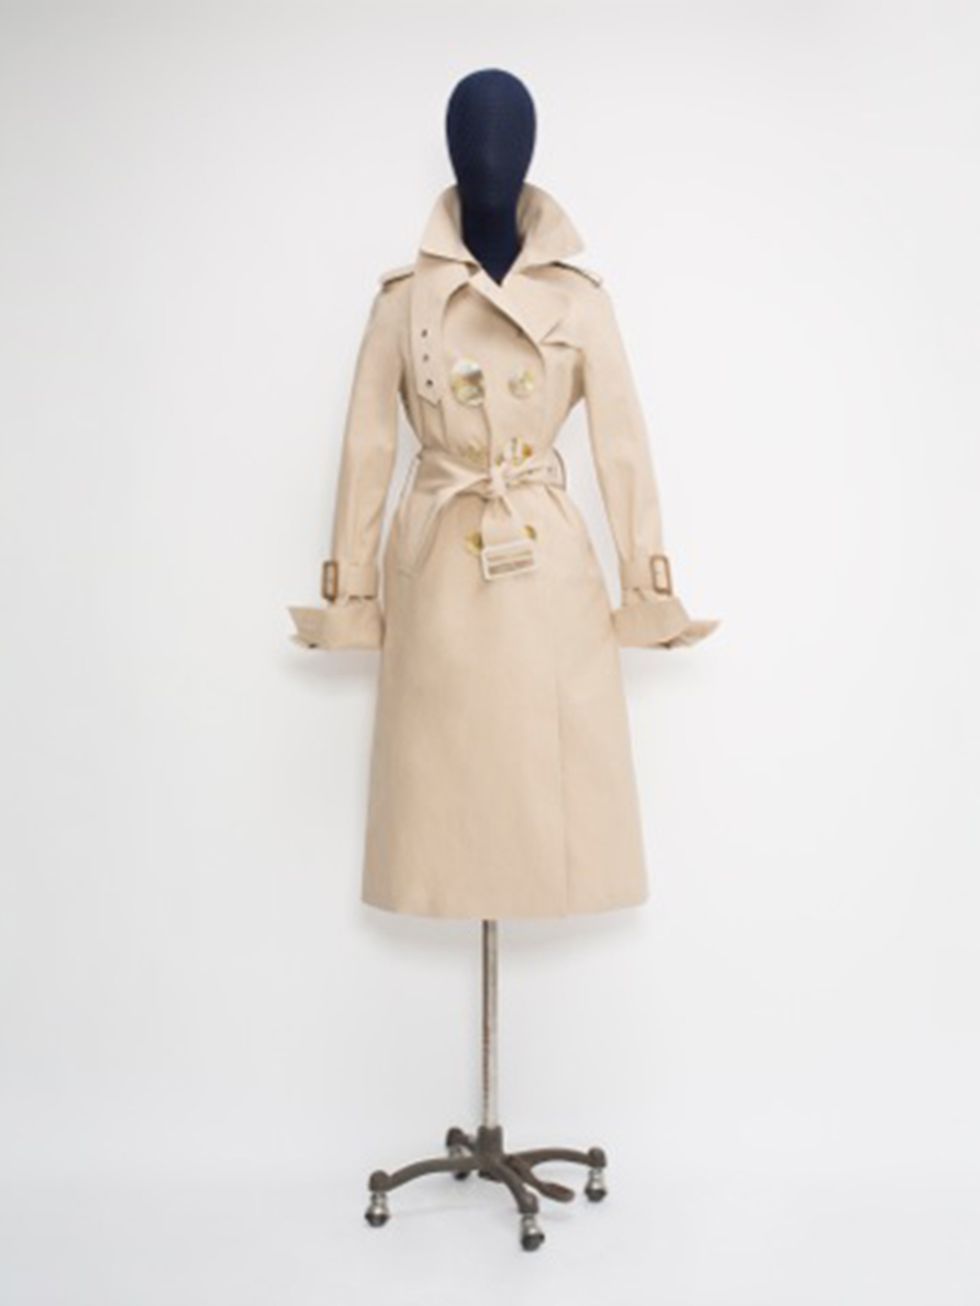 <p>J.W.Anderson x Mackintosh</p>

<p>If you thought the trench coat couldn&#39;t be improved upon, this collaboration might just make you change your mind. Retaining the features of a Mackintosh trench coat - taped seams, bonded cotton, detachable lining 